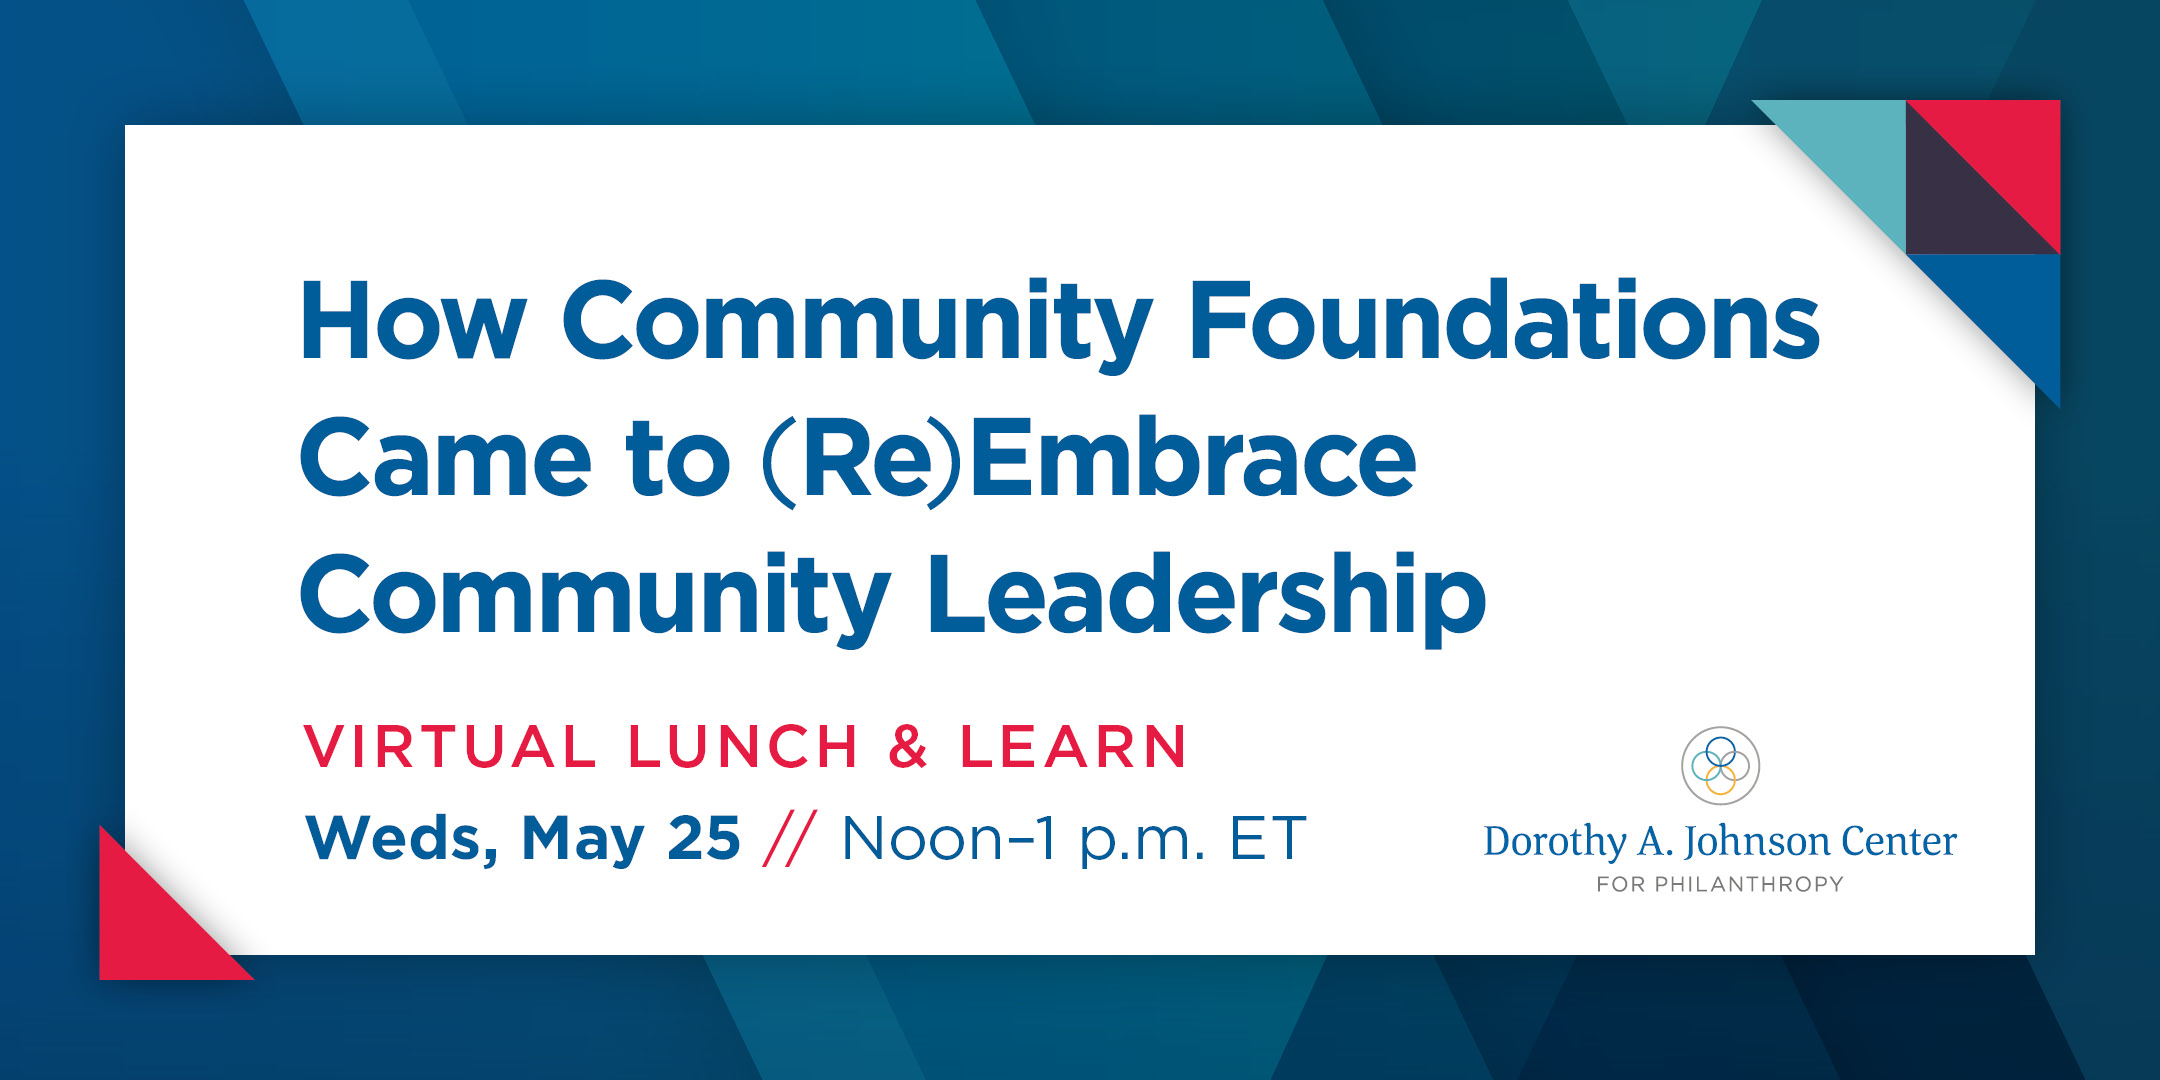 How Community Foundations Came to Re-Embrace Community Leadership: A Virtual Lunch & Learn Event